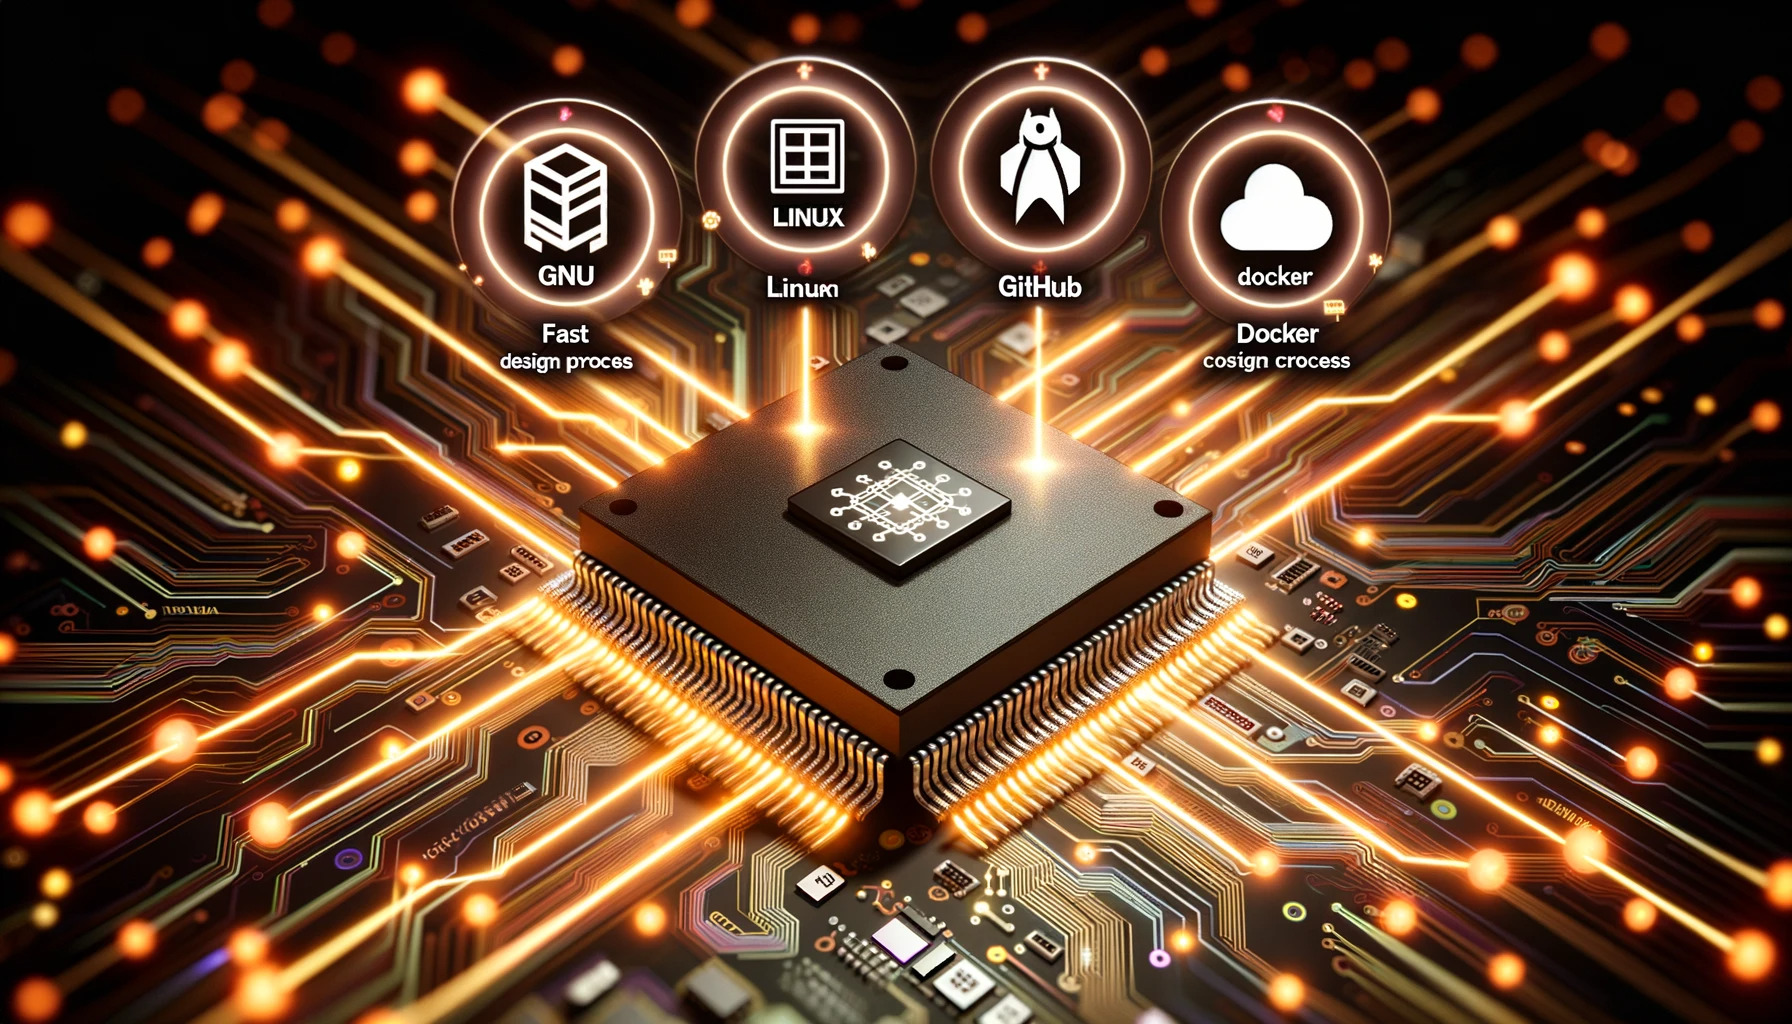 Digital render of an embedded system chip with glowing lines connecting to icons of GNU, Linux, GitHub, and Docker. Around the chip, there are graphics indicating fast design process and cost efficiency. Warm and vibrant colors are used. Aspect ratio 16:9.